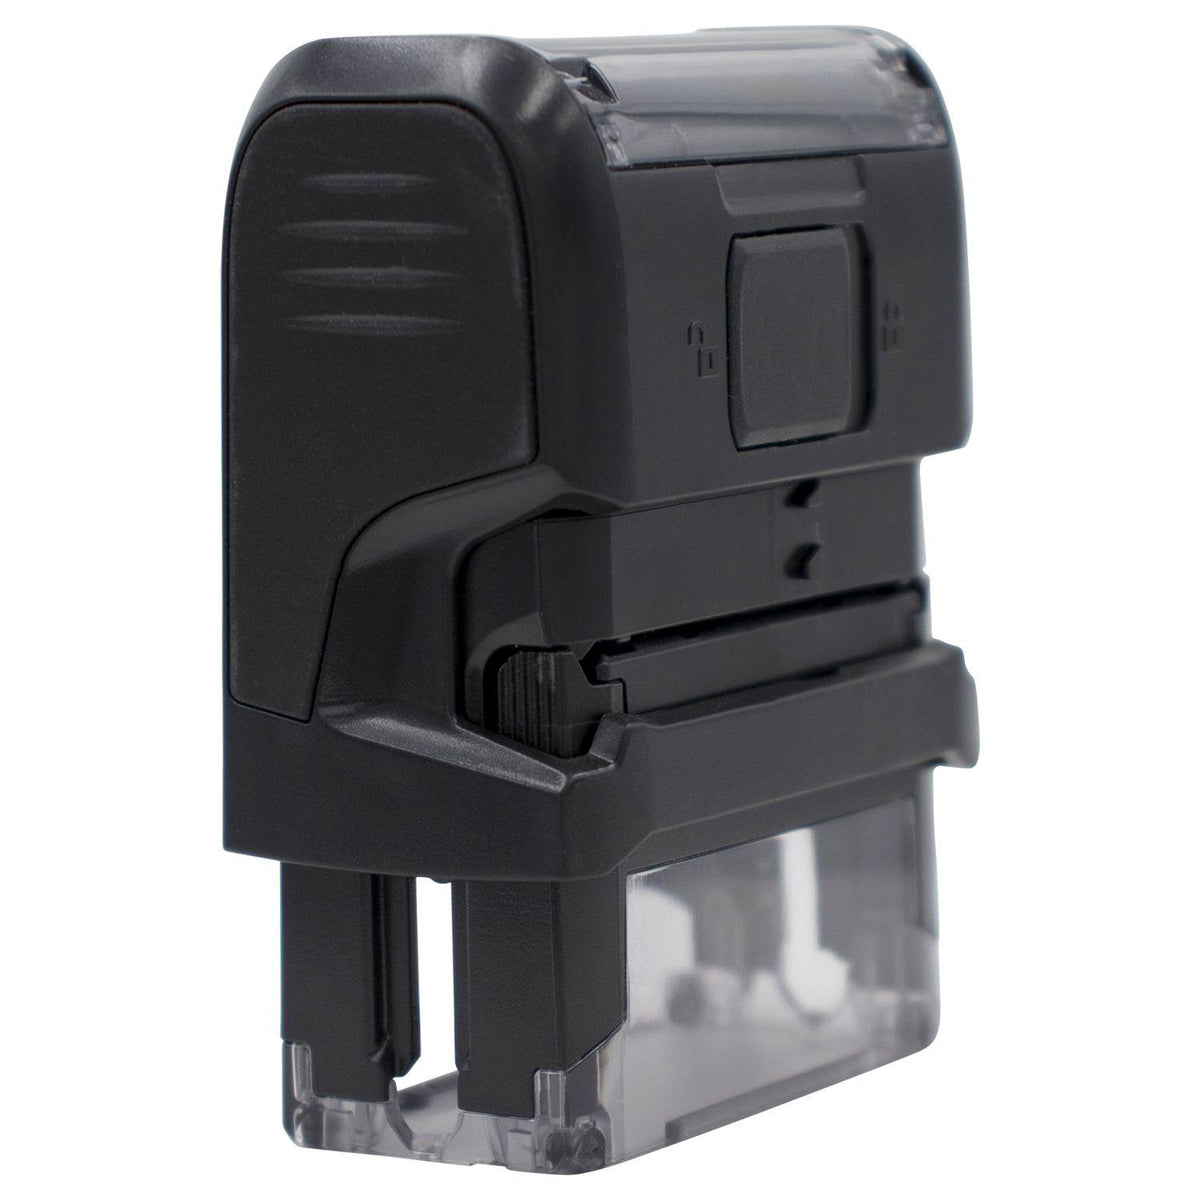 Large Self Inking Broker Copy Stamp Back View